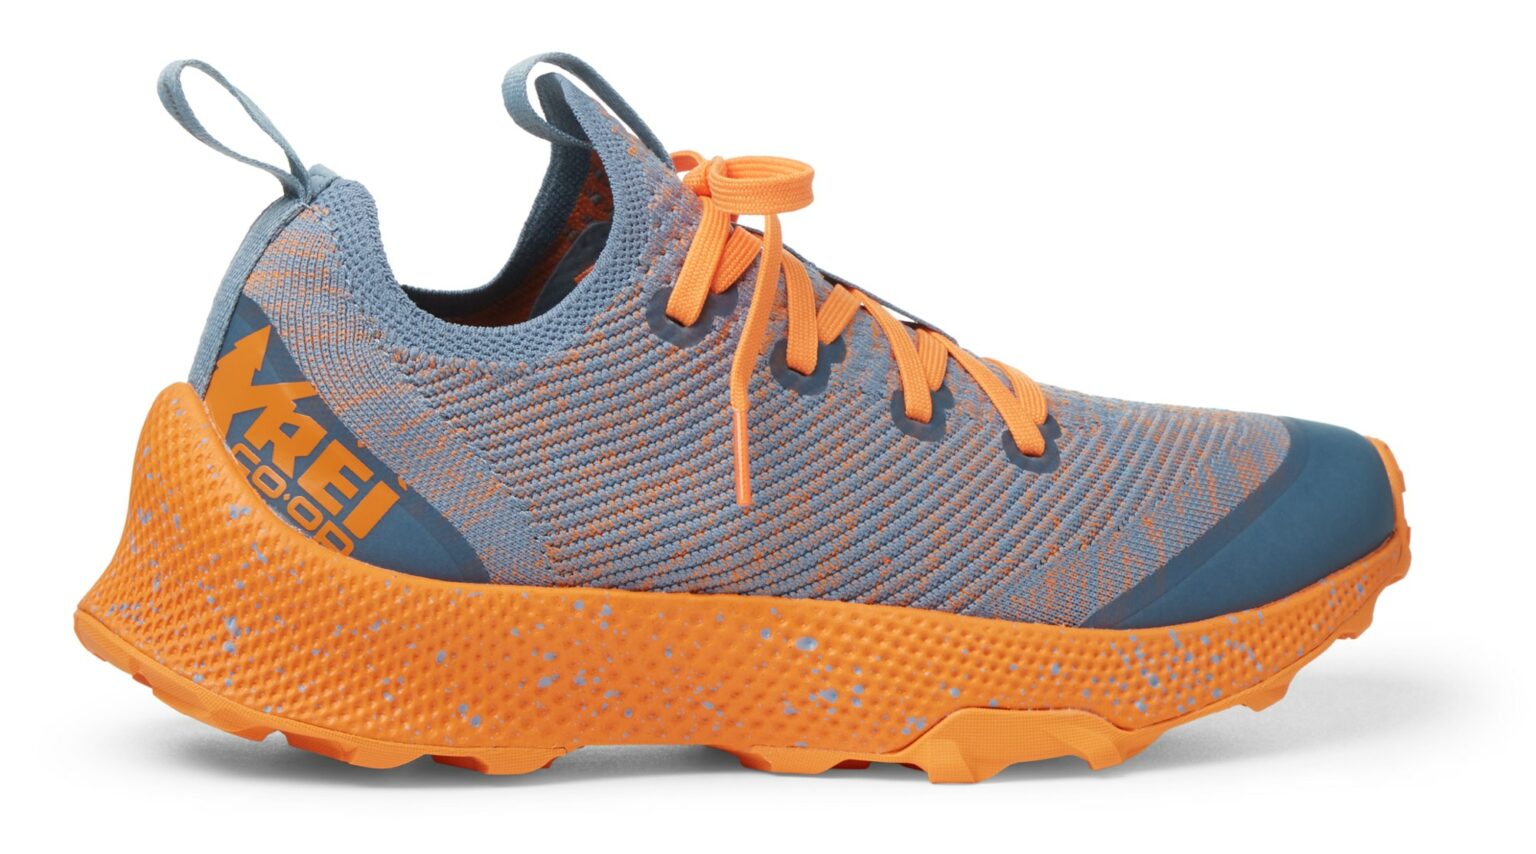 Introducing the REI Co-op Swiftland MT Trail - Trail Running Shoe